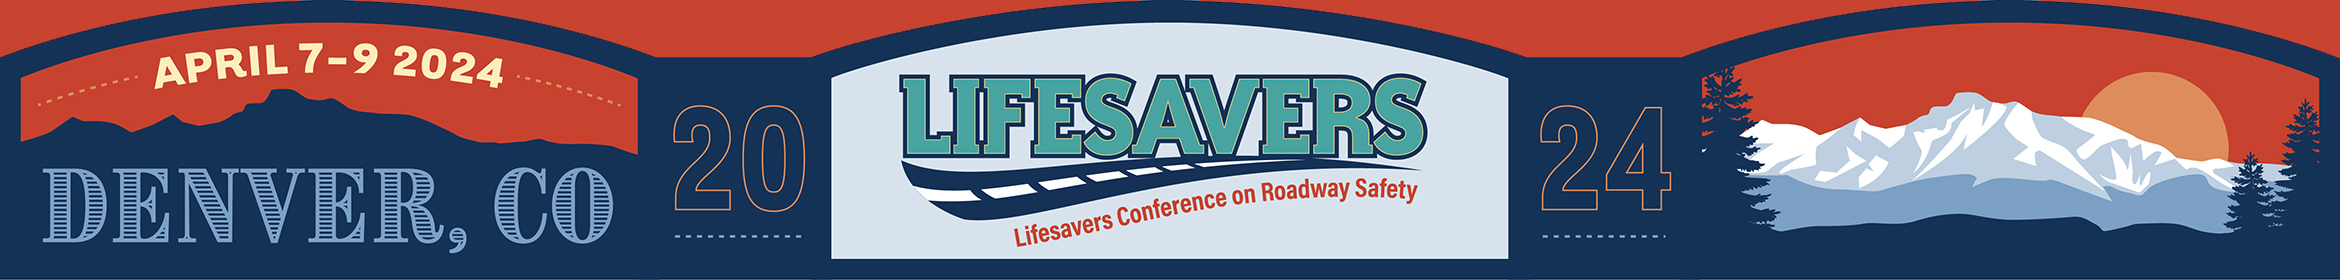 2024 Lifesavers Conference on Roadway Safety Main banner